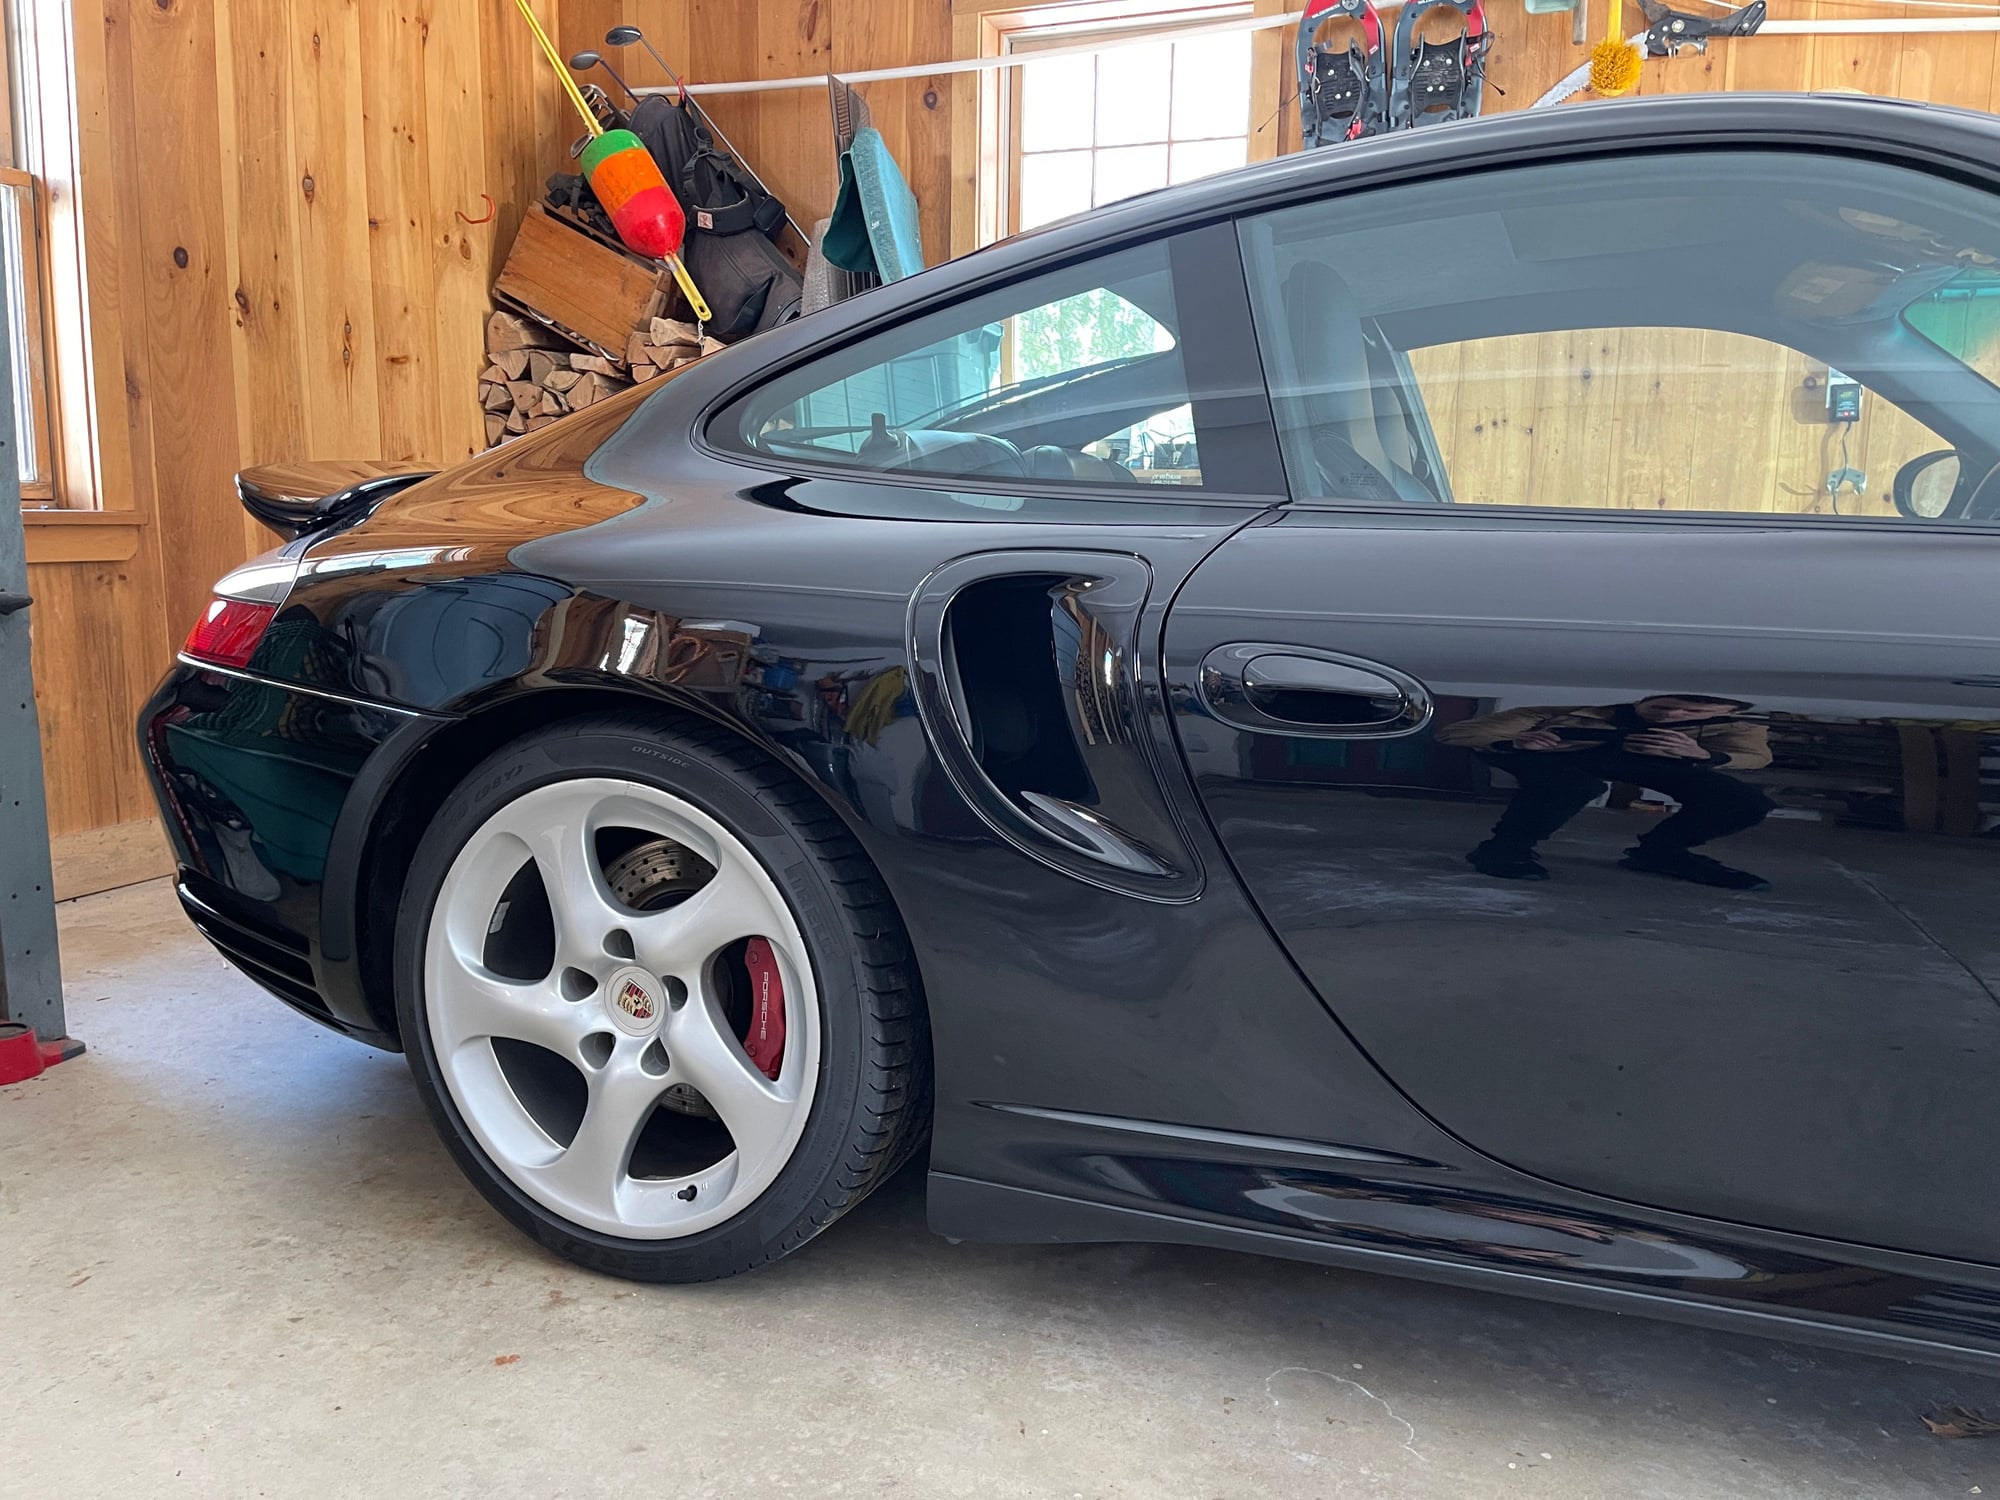 2001 Porsche 911 - 2001 Porsche 911 TT 996 Twin Turbo 6 Speed Manual in Maine - Used - VIN WP0AB29971S685079 - 78,000 Miles - 6 cyl - AWD - Manual - Coupe - Black - Brunswick, ME 04011, United States